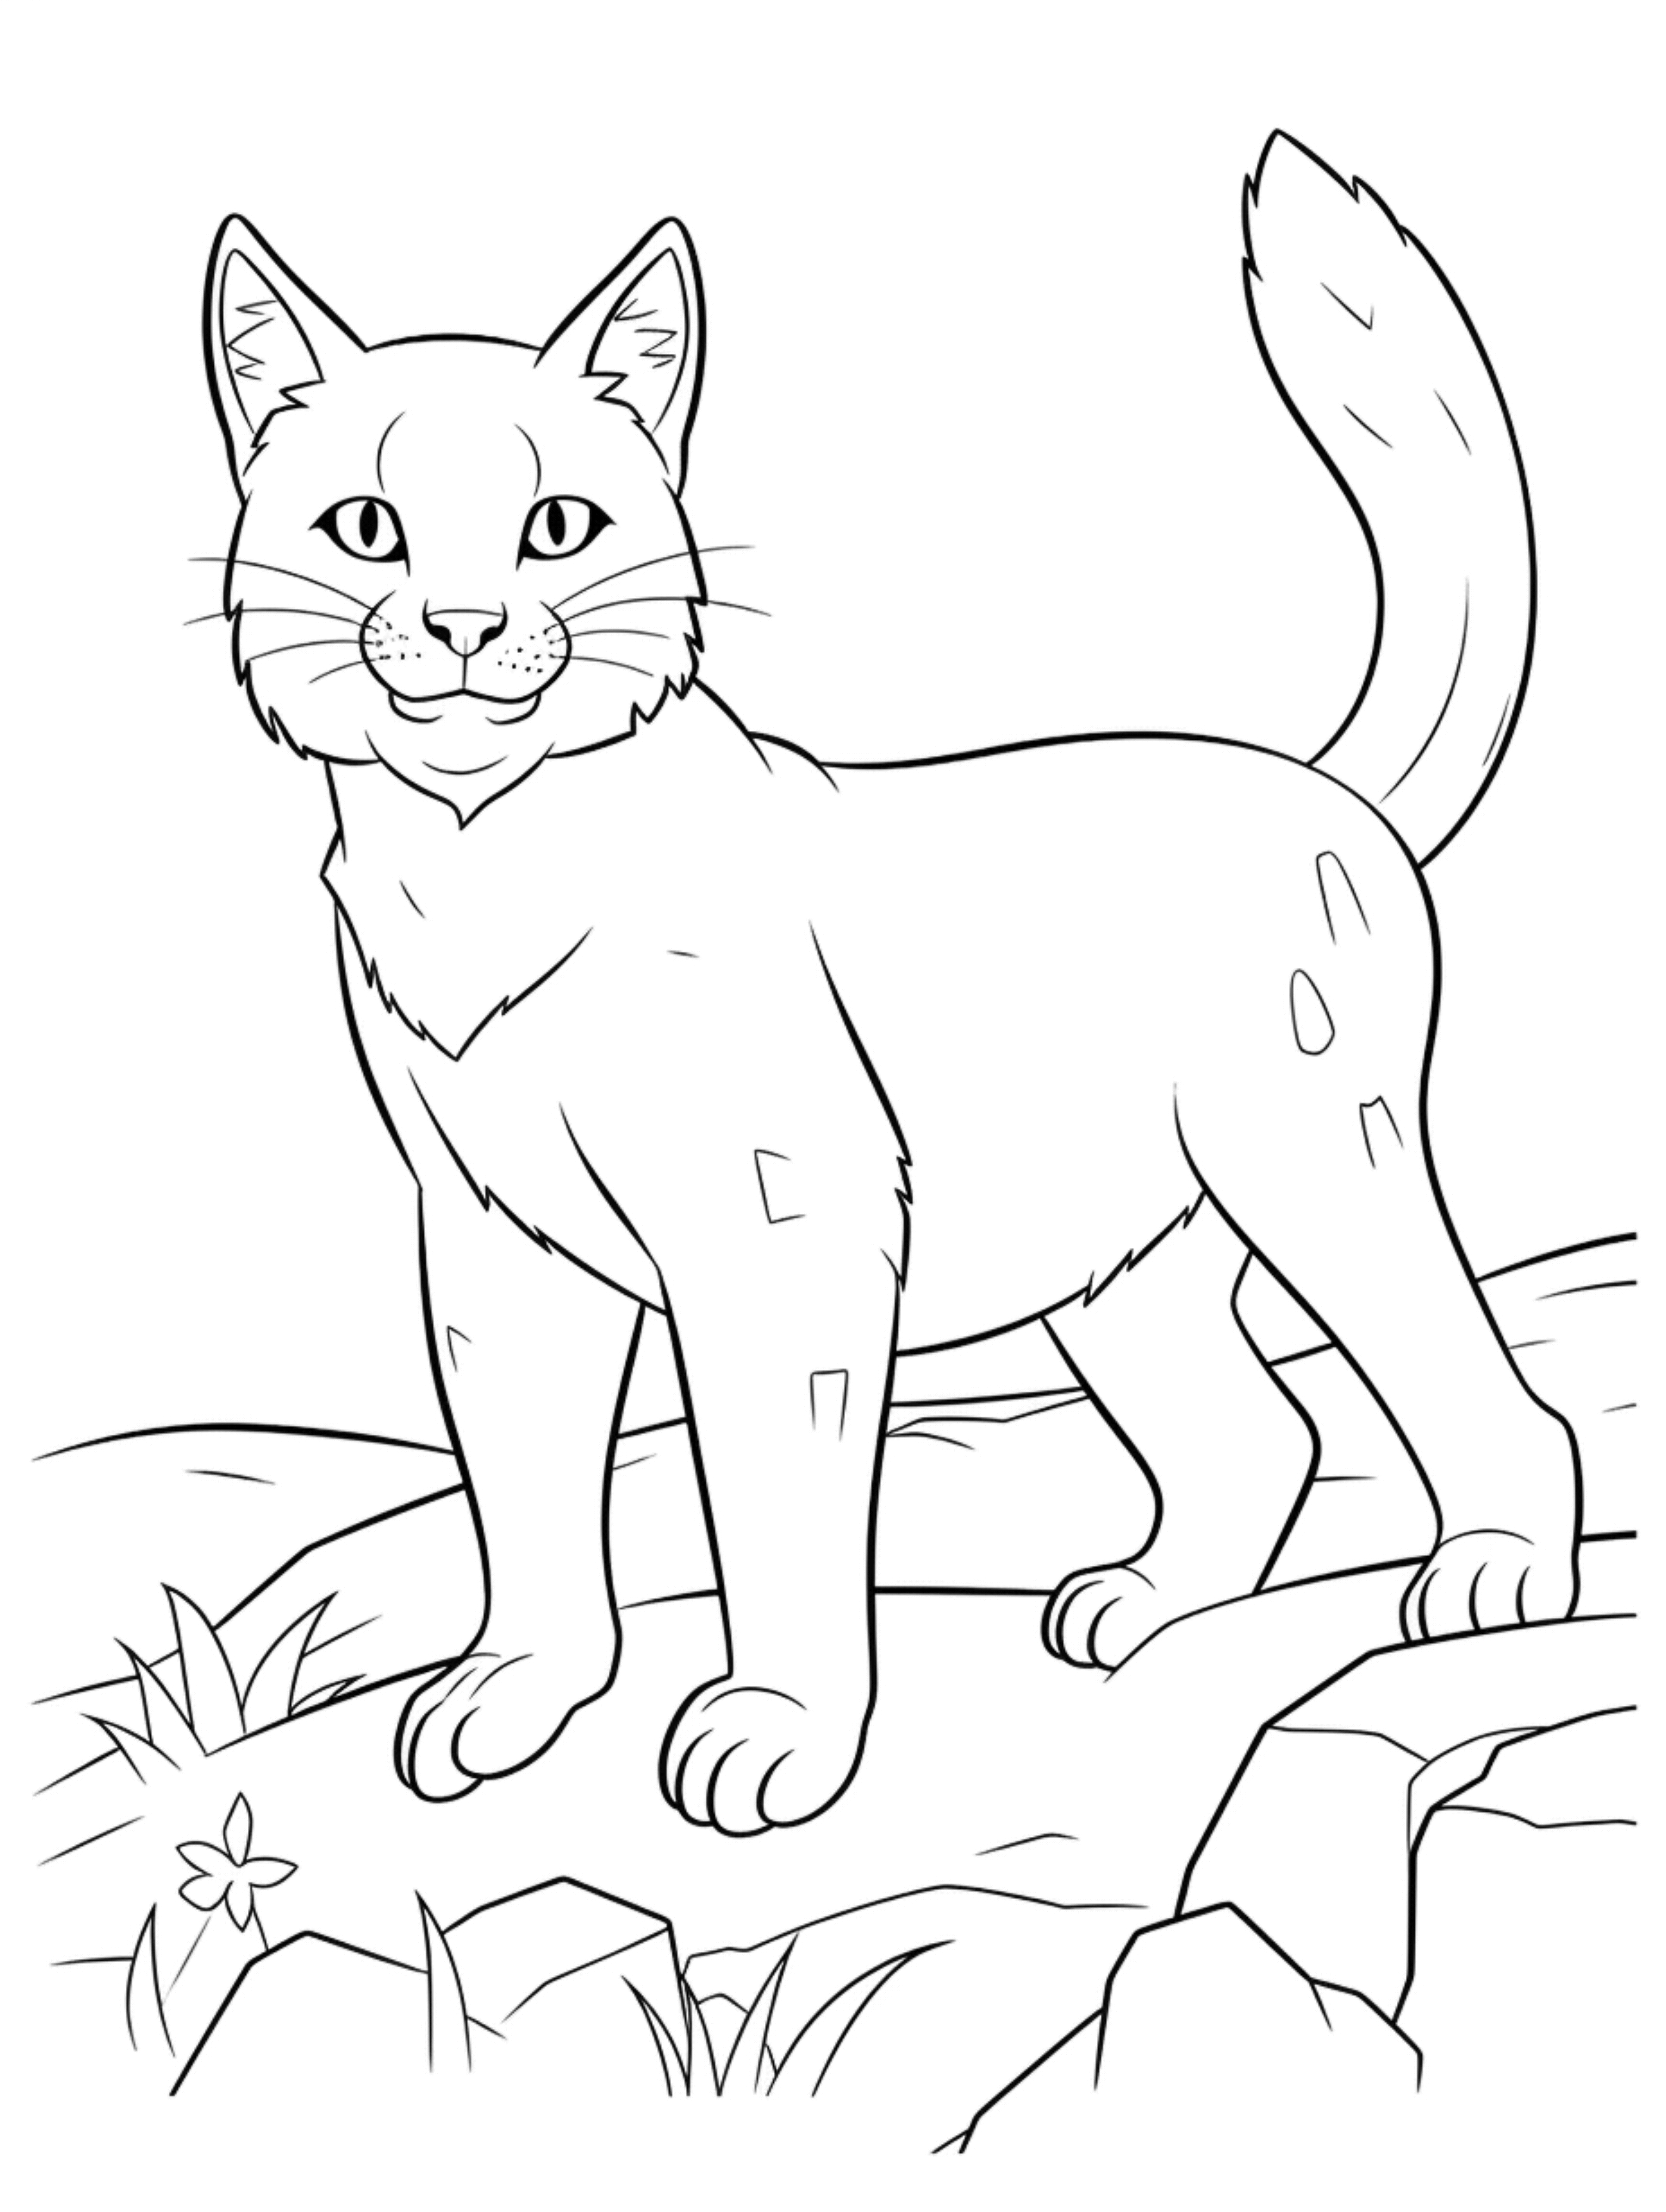 01 cute wildcat in its habitat coloring page for kid